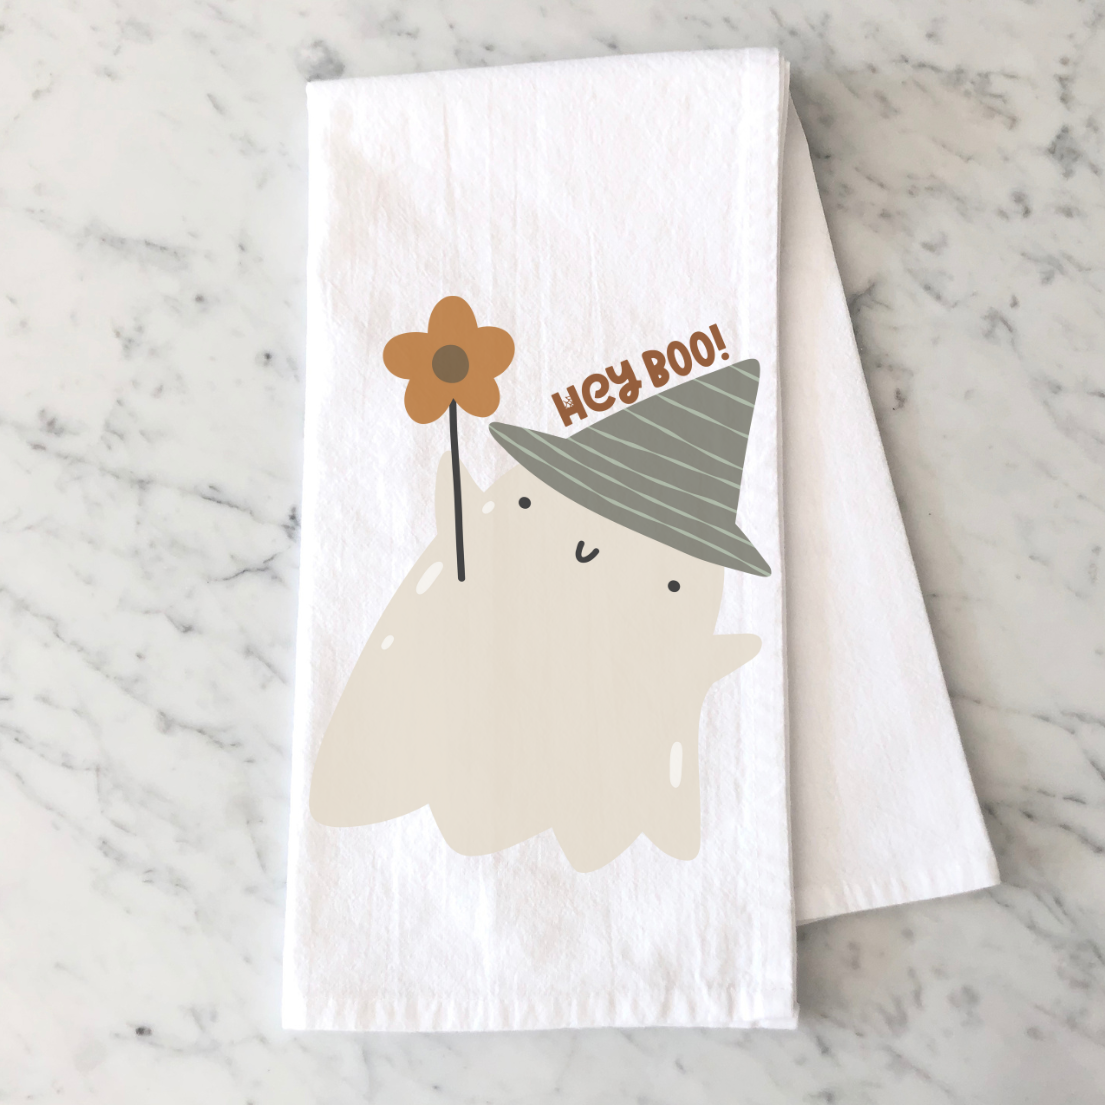 hey boo with cute ghost on a kitchen towel